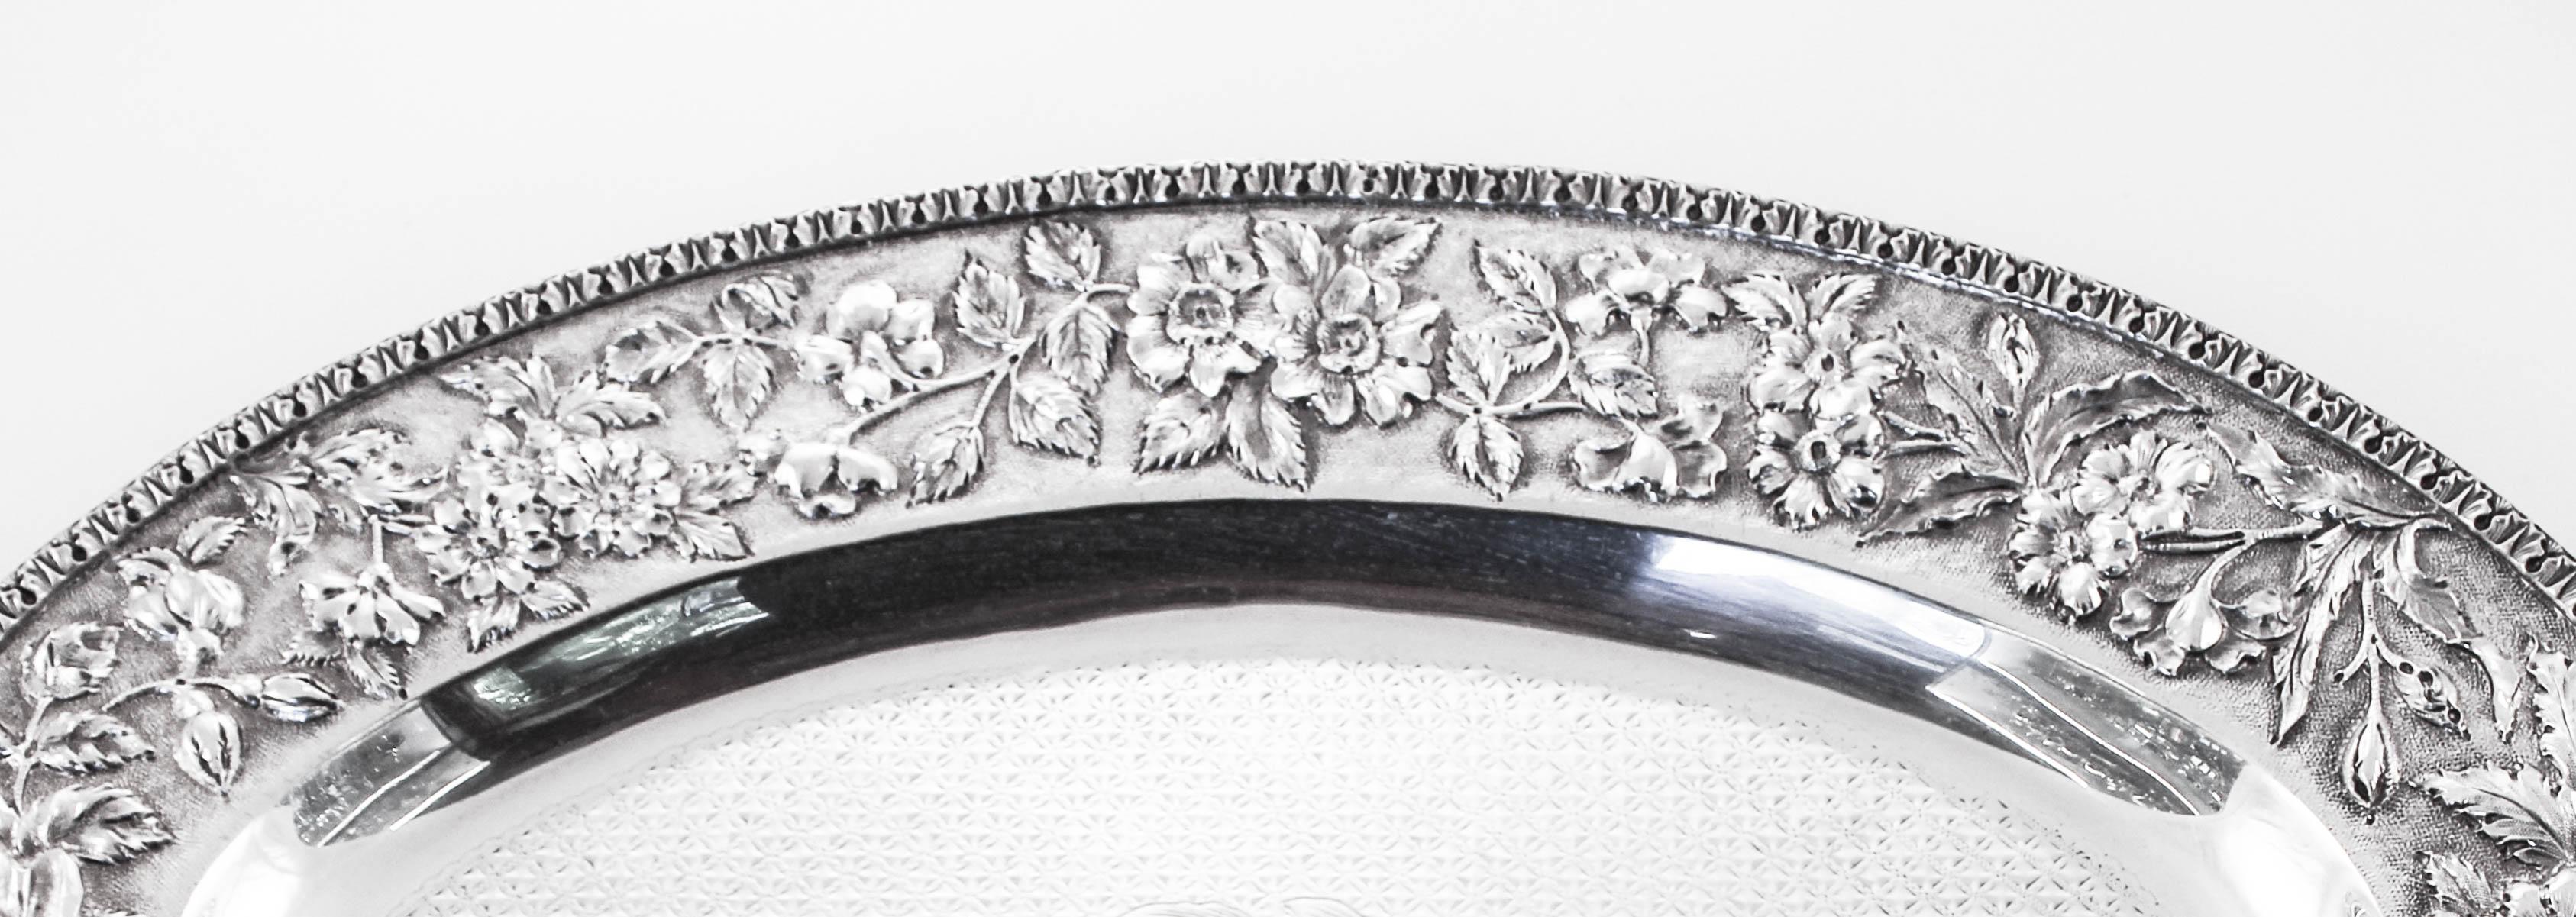 American Sterling Repousse Tray